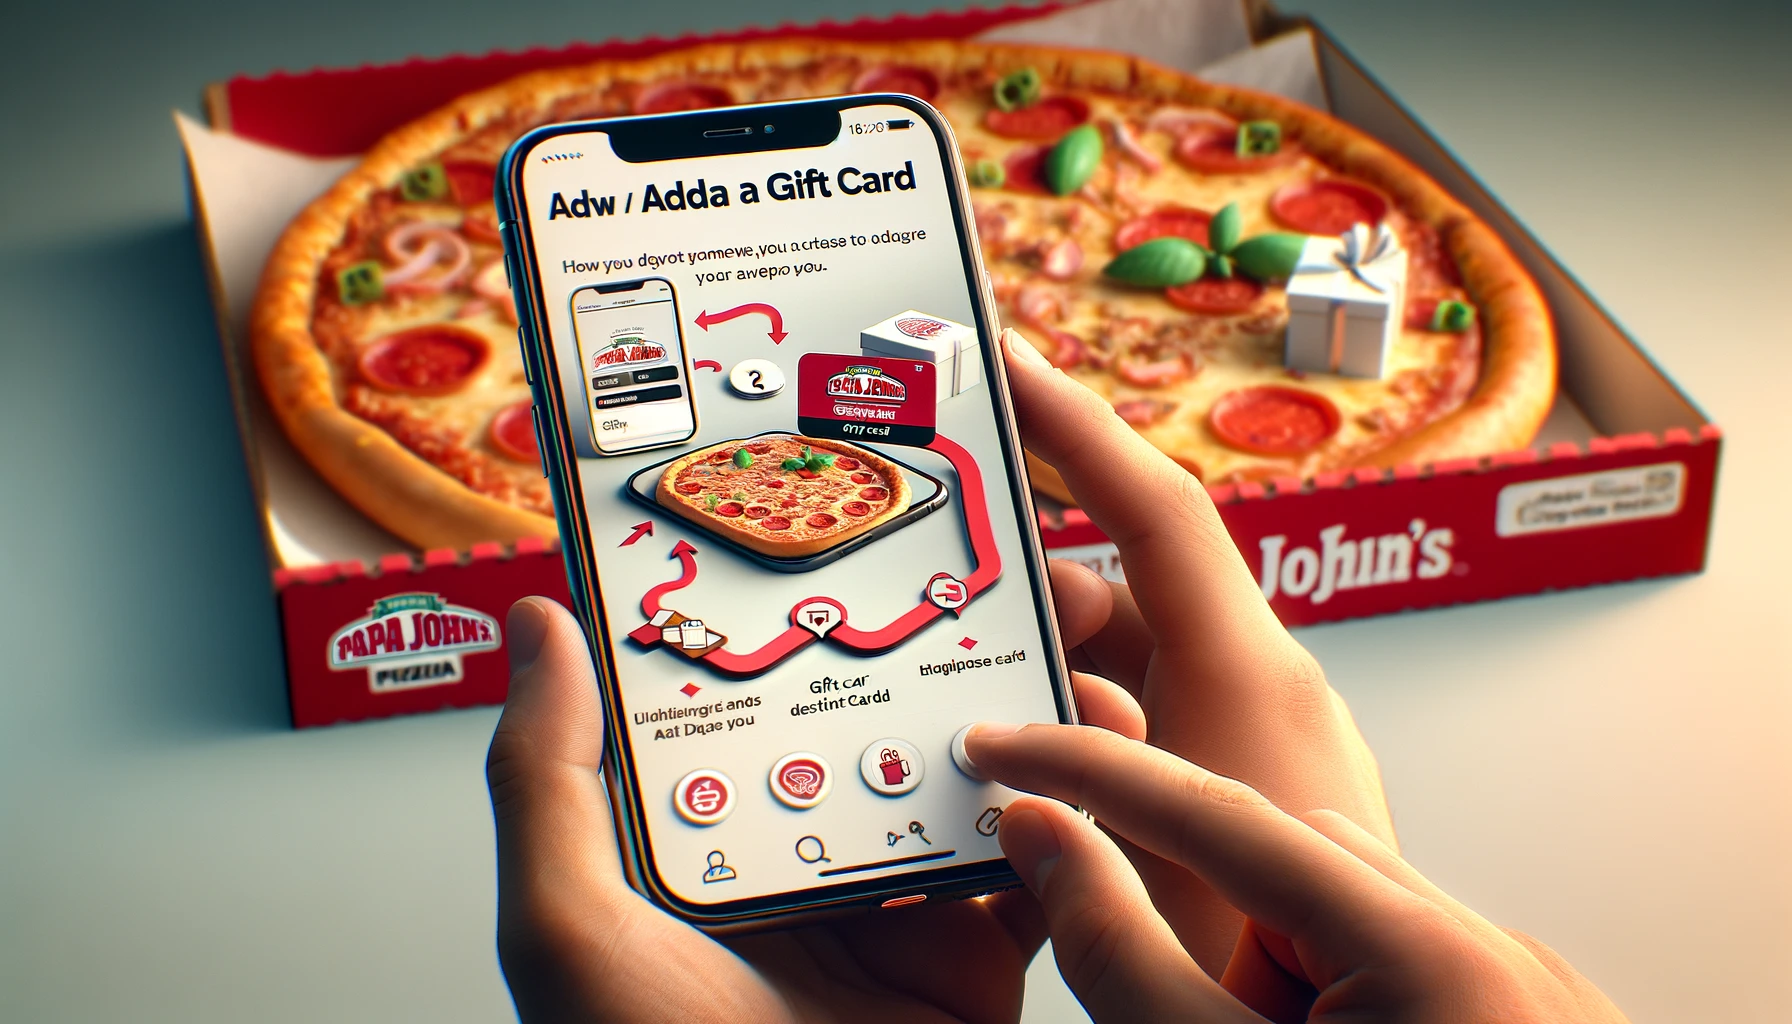 How to Add Gift Card to Papa John’s App